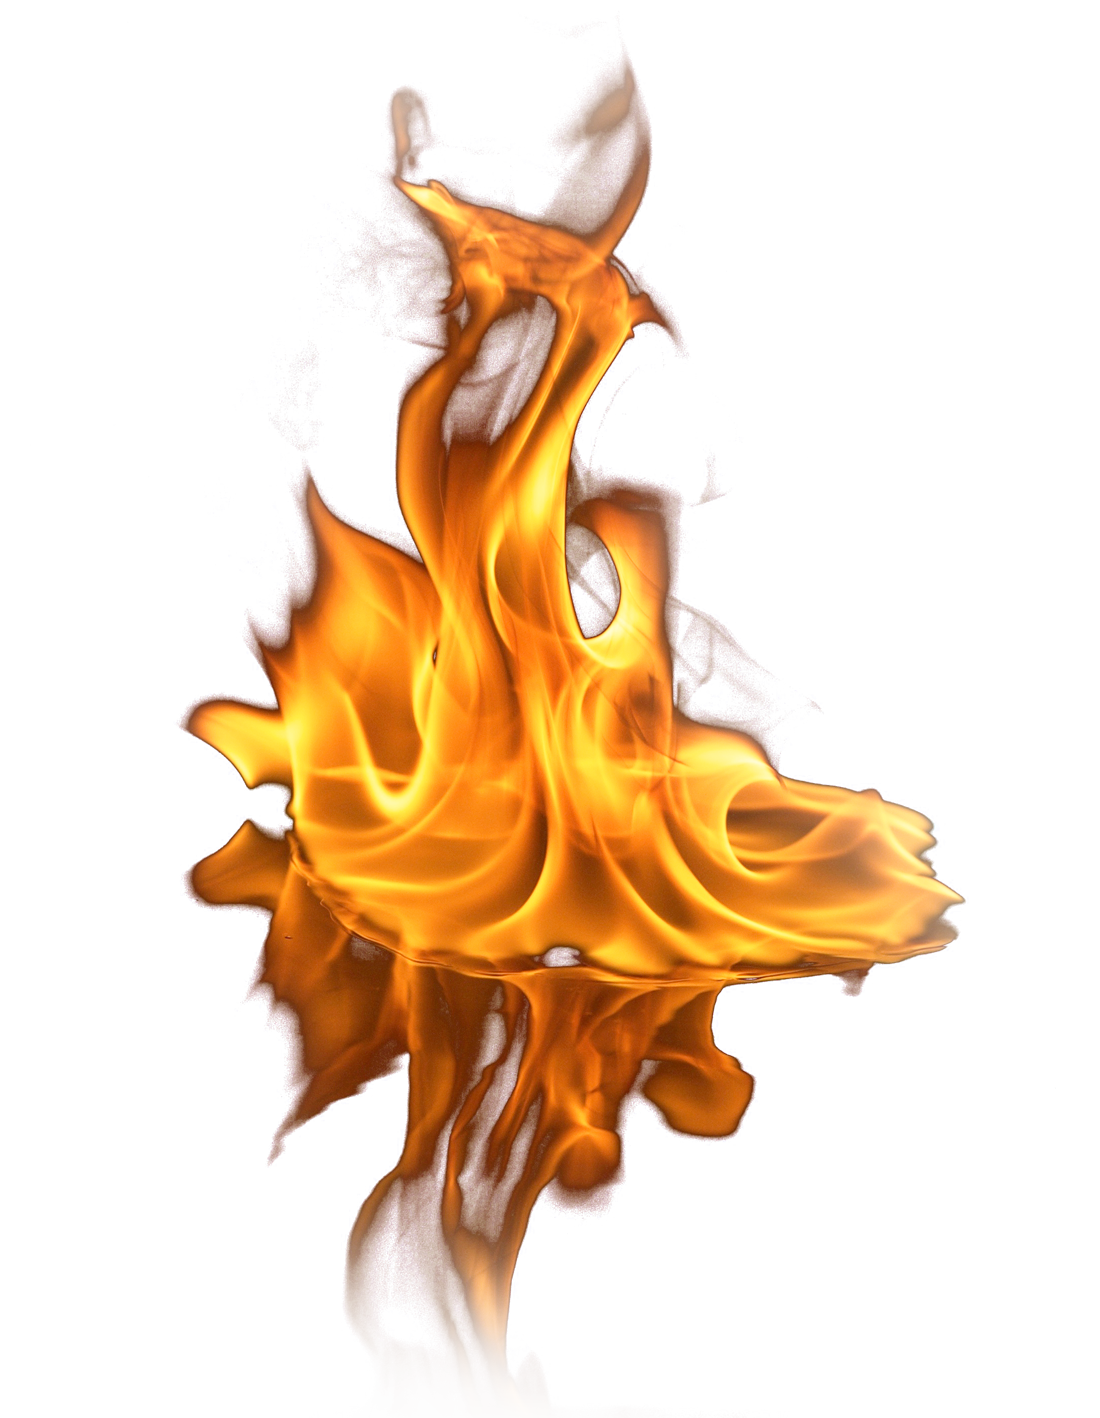 Flaming Vector Art PNG, Flame, Flames, Fire PNG Image For Free